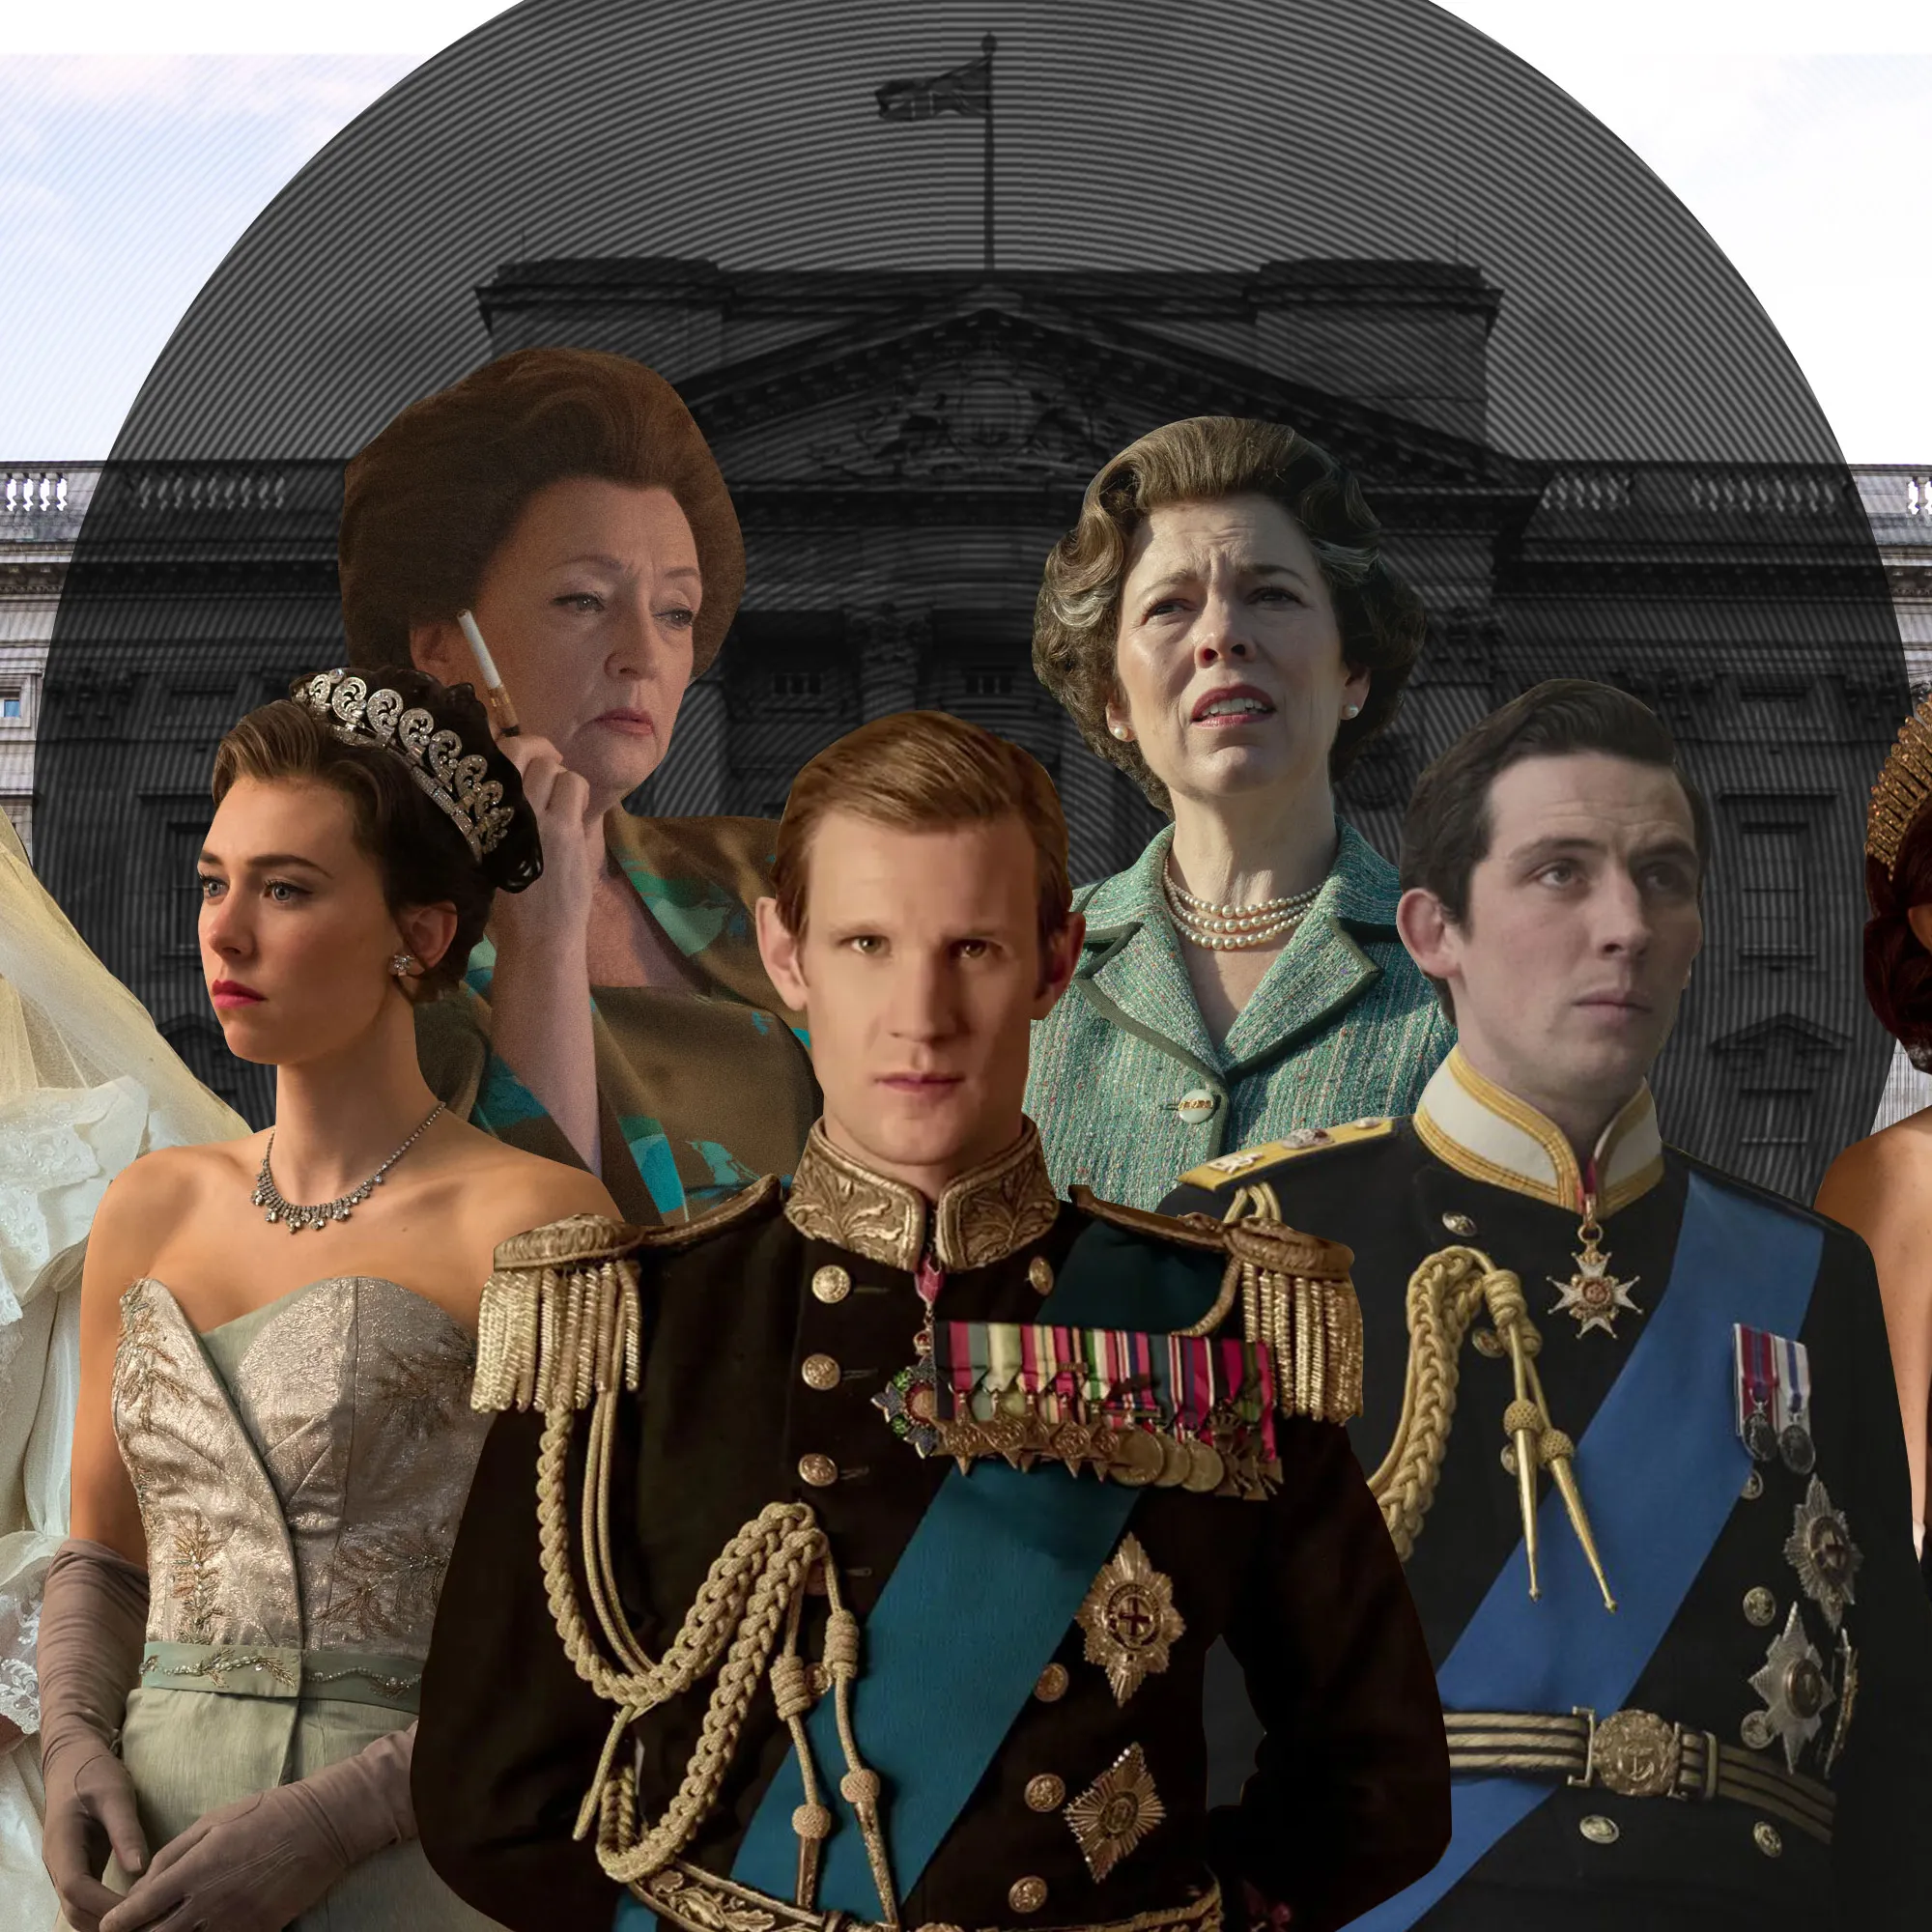 The Crown fictionalized the history of the British royal family under the late Queen Elizabeth Over time, the producers had to add a caveat at the beginning of each episode to advise the audience that the program was not an accurate historical depiction of the Royal Family. 